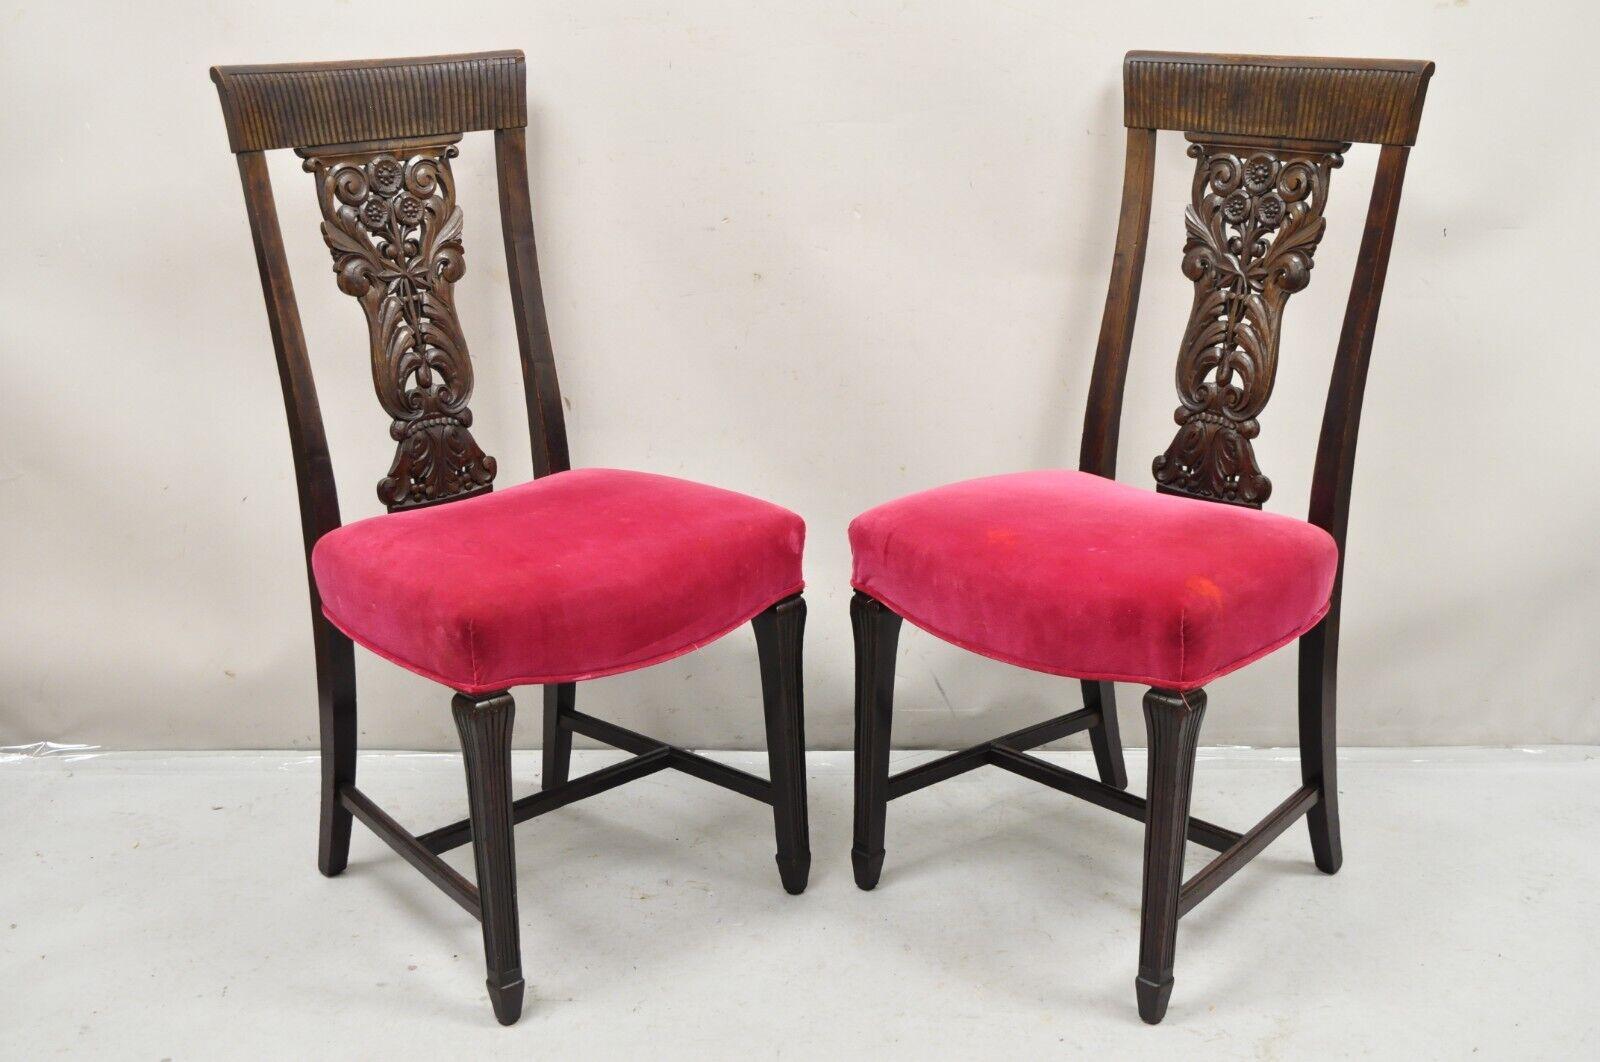 Antique Edwardian Floral Carved Mahogany Red Mohair Dining Chairs - Set of 4. Item features solid wood frames, floral carved front and back, stretcher base, very nice antique set. Circa  Early 1900s. Measurements: 40.5